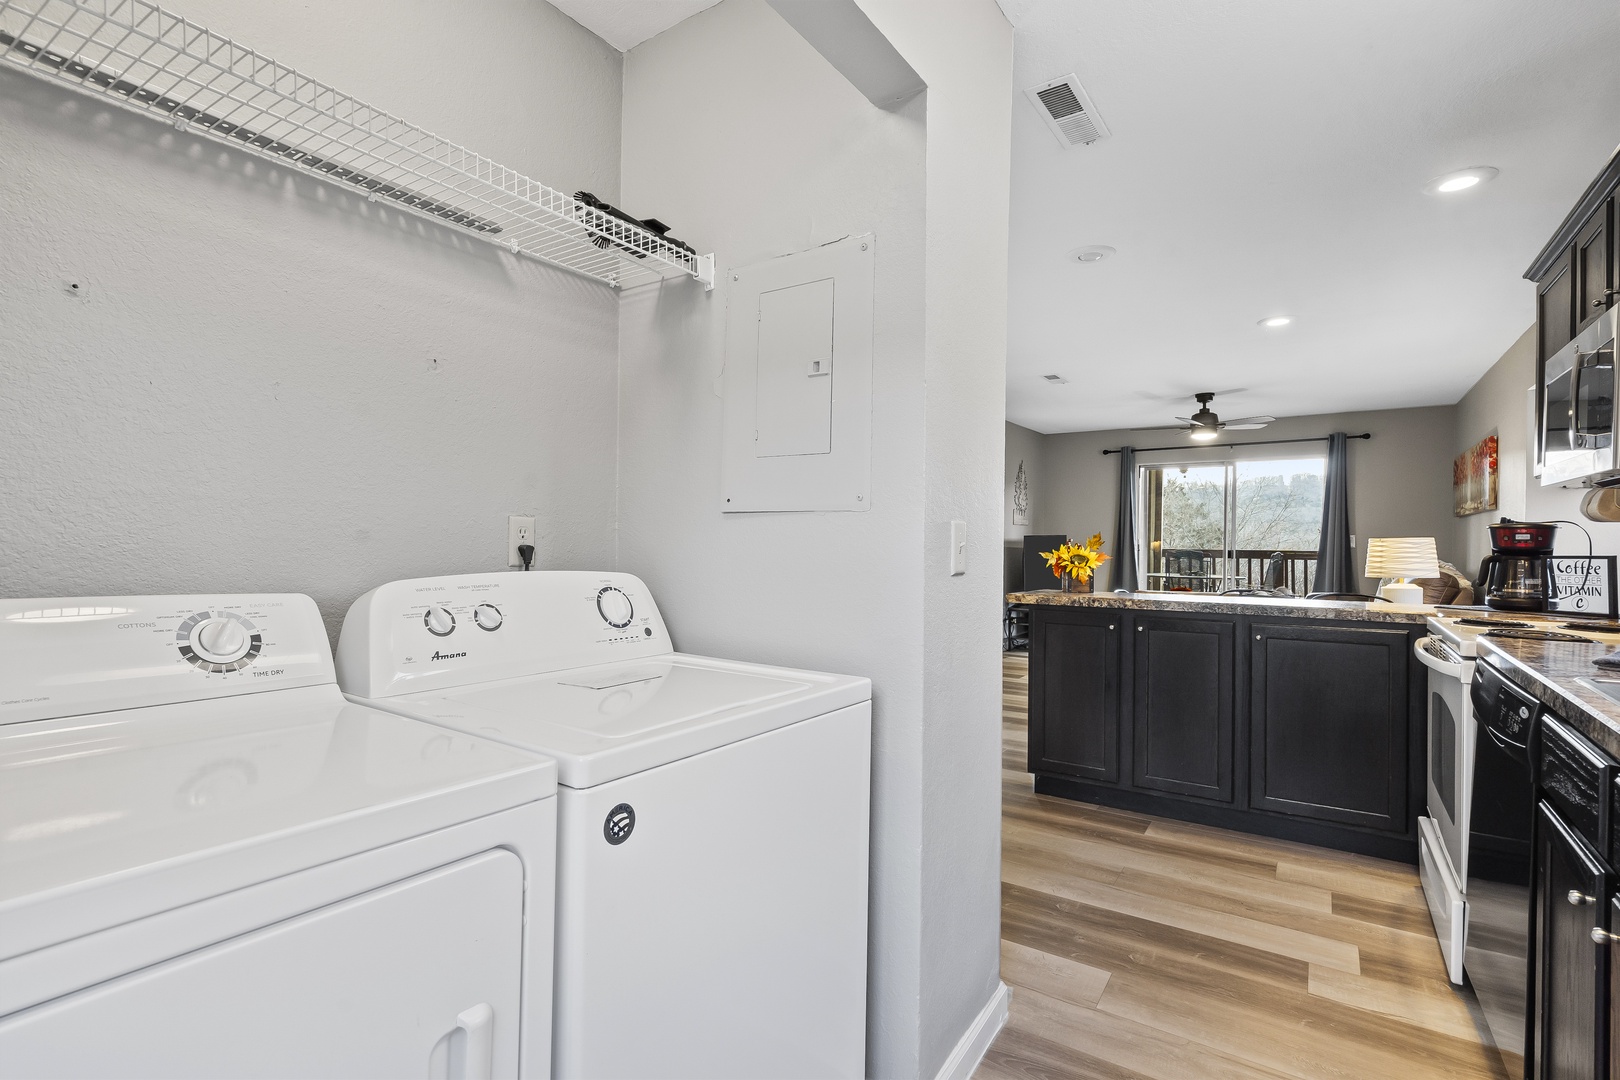 Private laundry is available for your stay, tucked away in the kitchen area